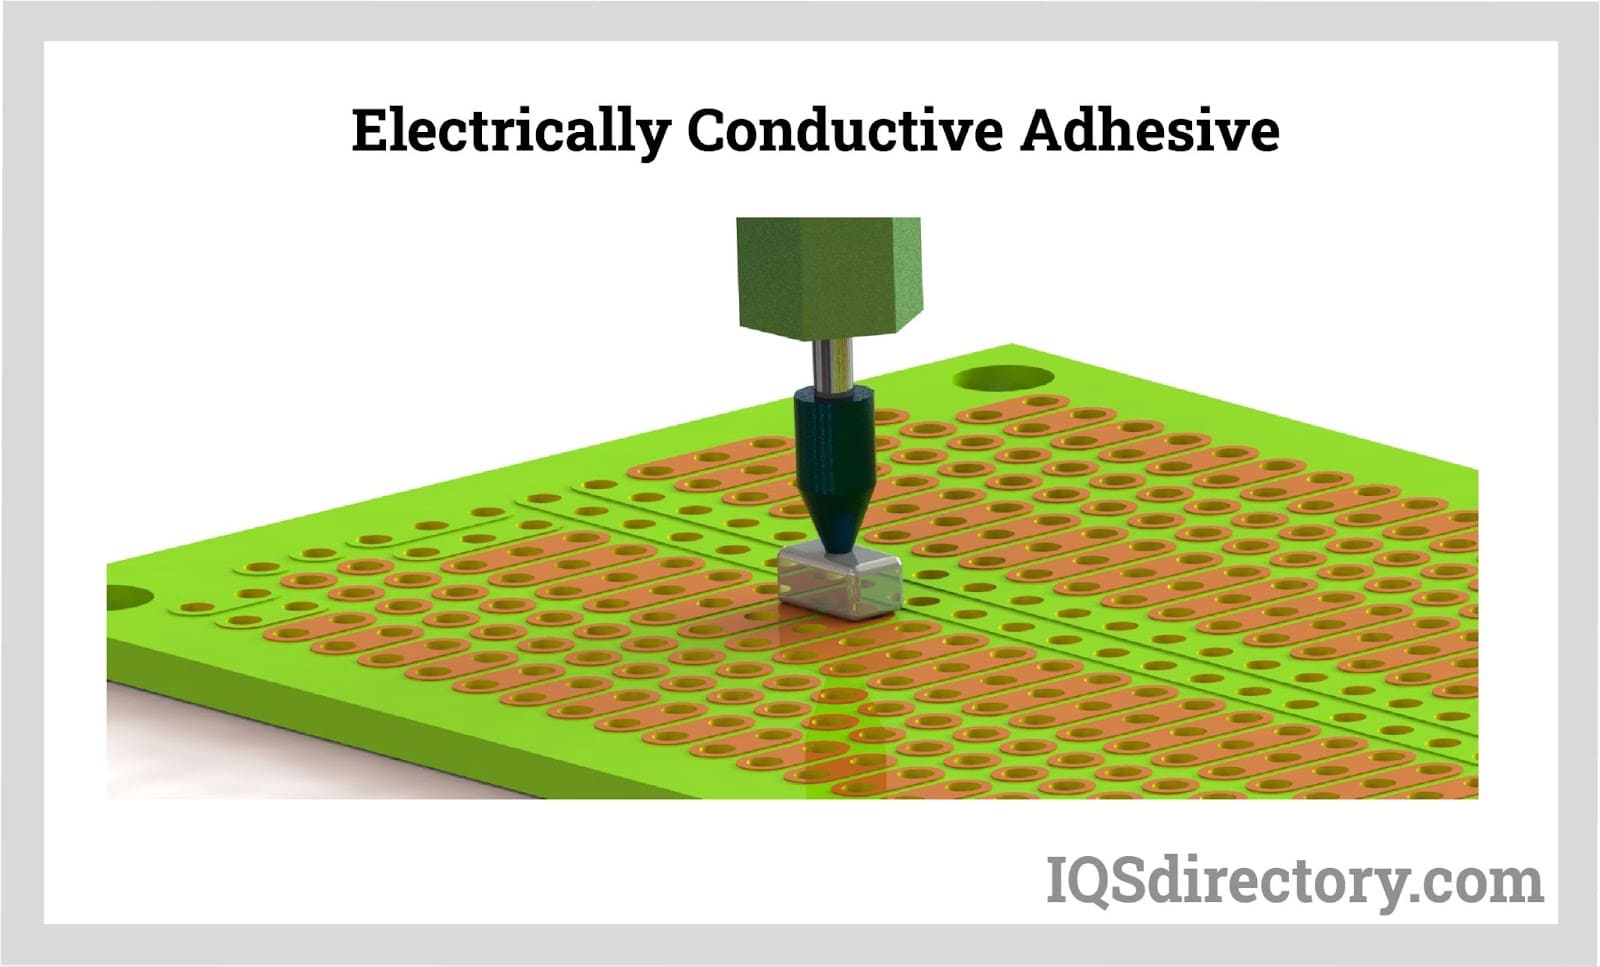 Electrically Conductive Adhesive